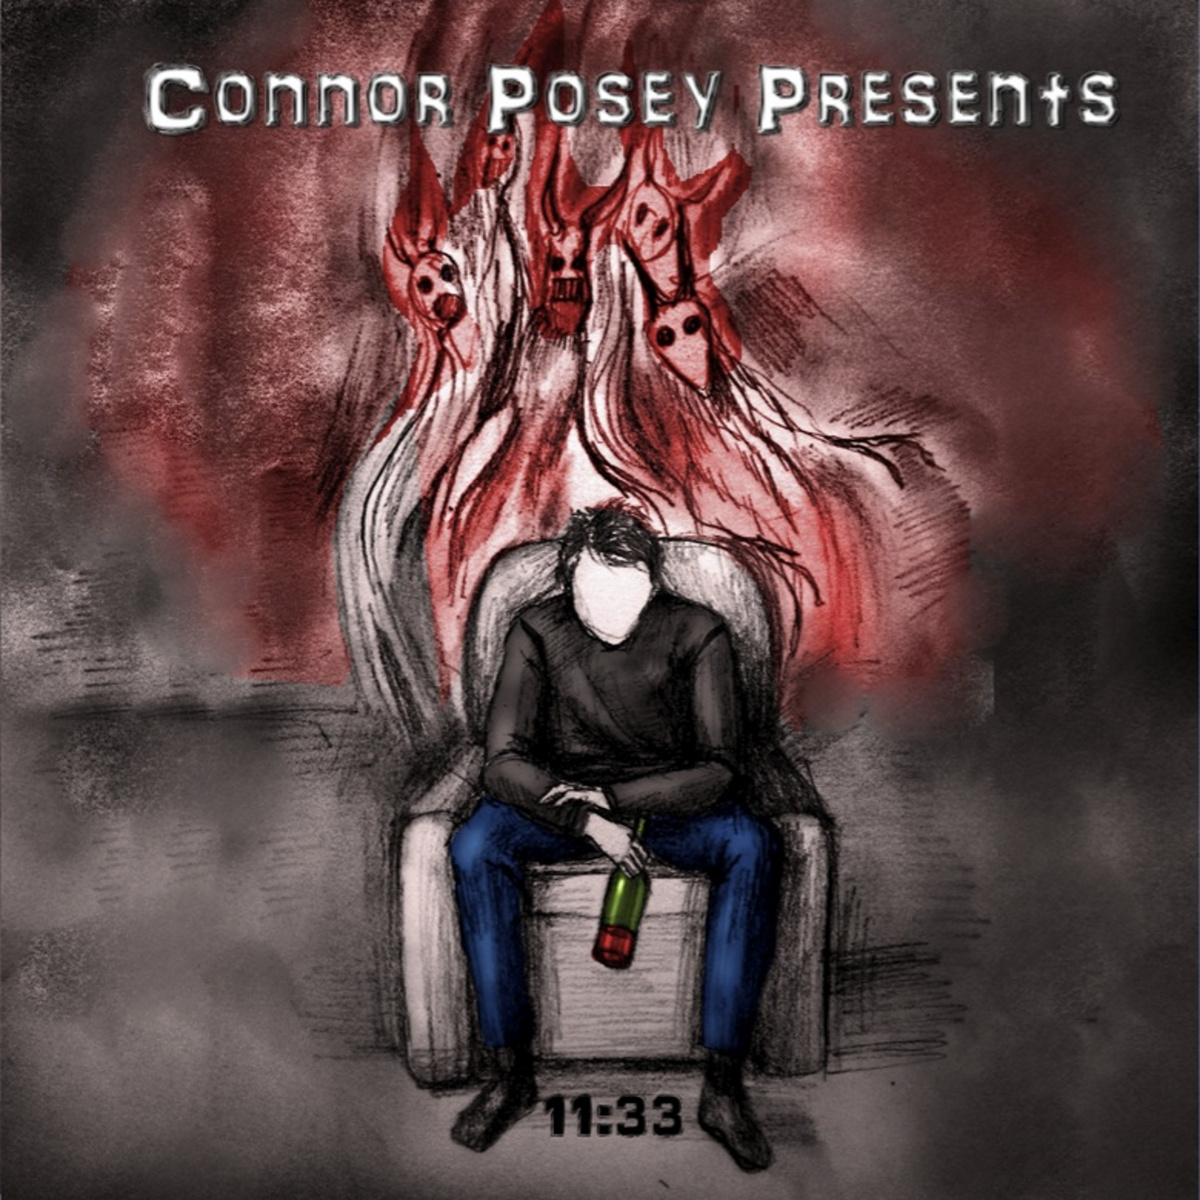  Connor Posey Presents – 11:33